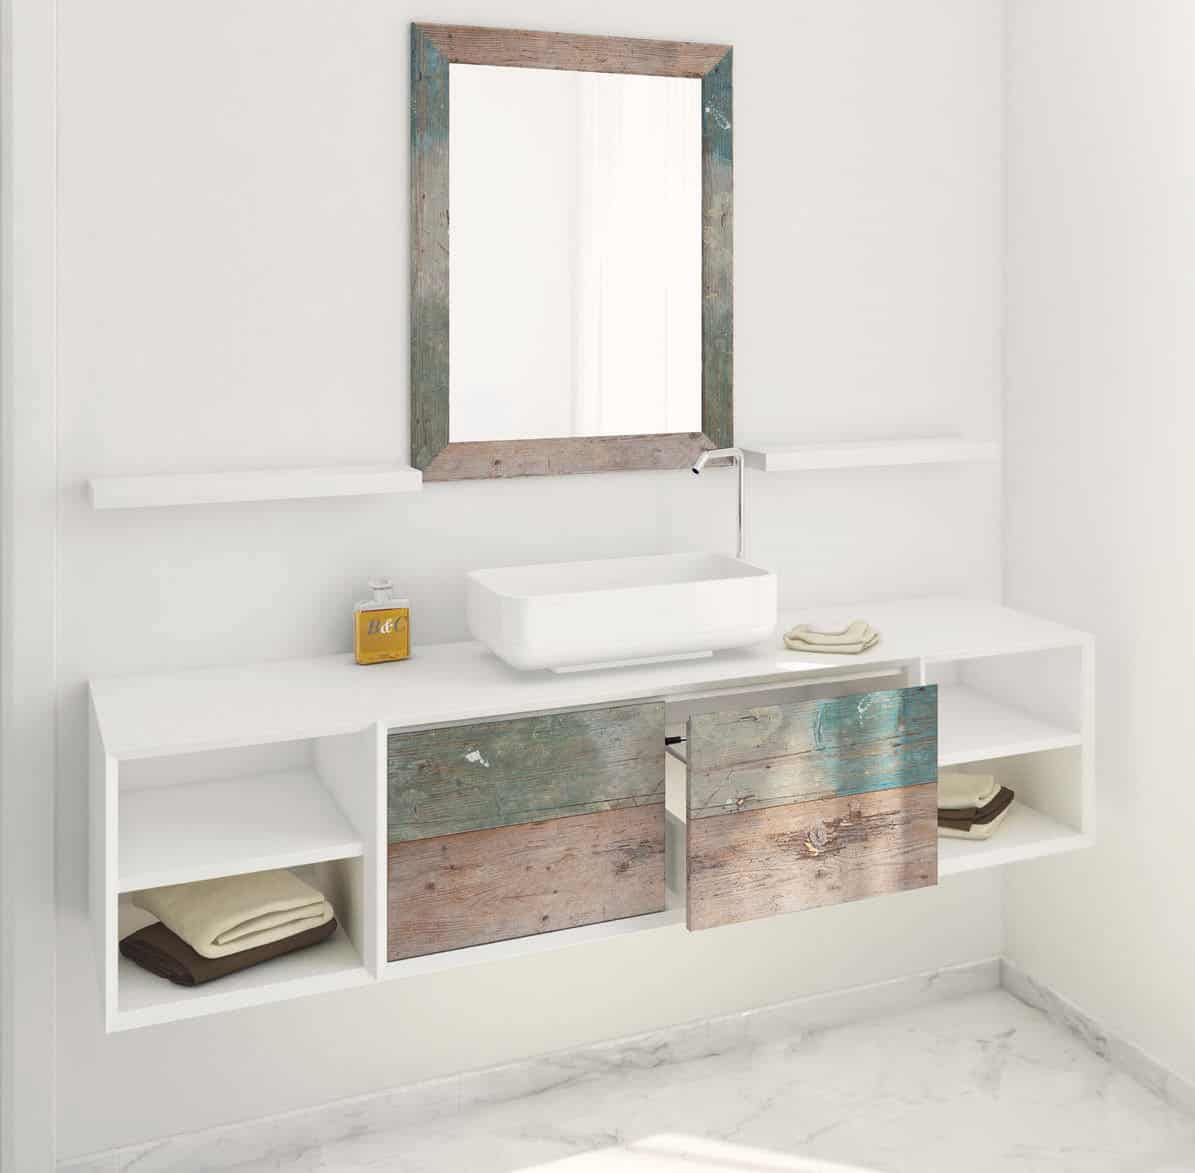 10-bianchini-and-capponi-materia-multicolor-weathered-wood-look-bathroom-collection.jpg